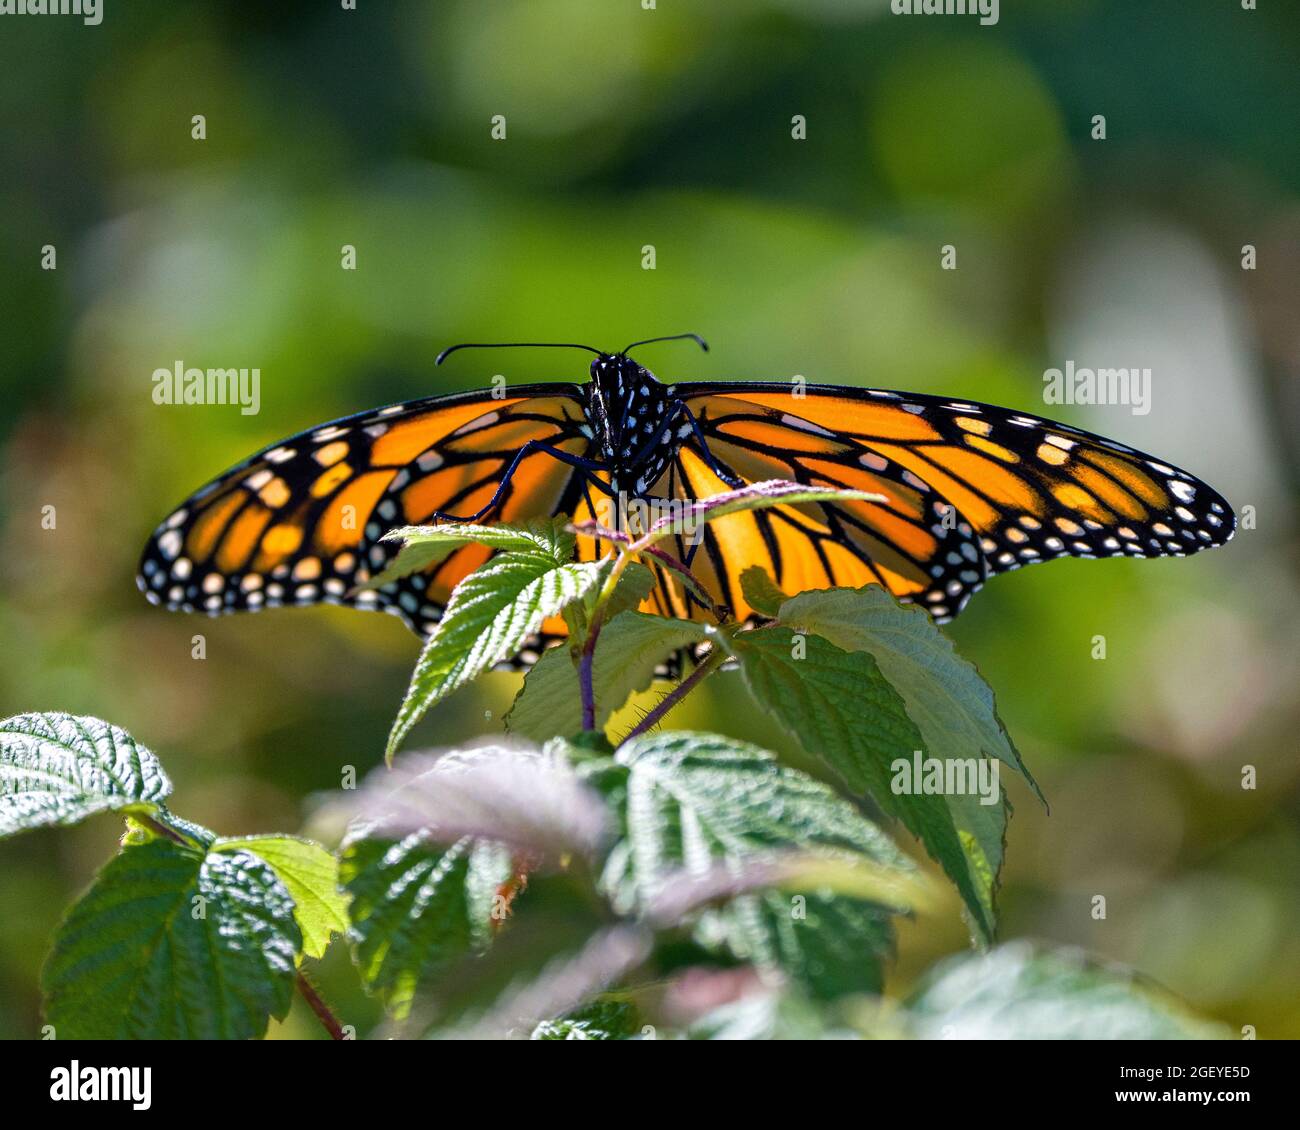 Monarch Butterfly sipping or drinking nectar from a plant with a blur green background in its environment and habitat surrounding. Stock Photo